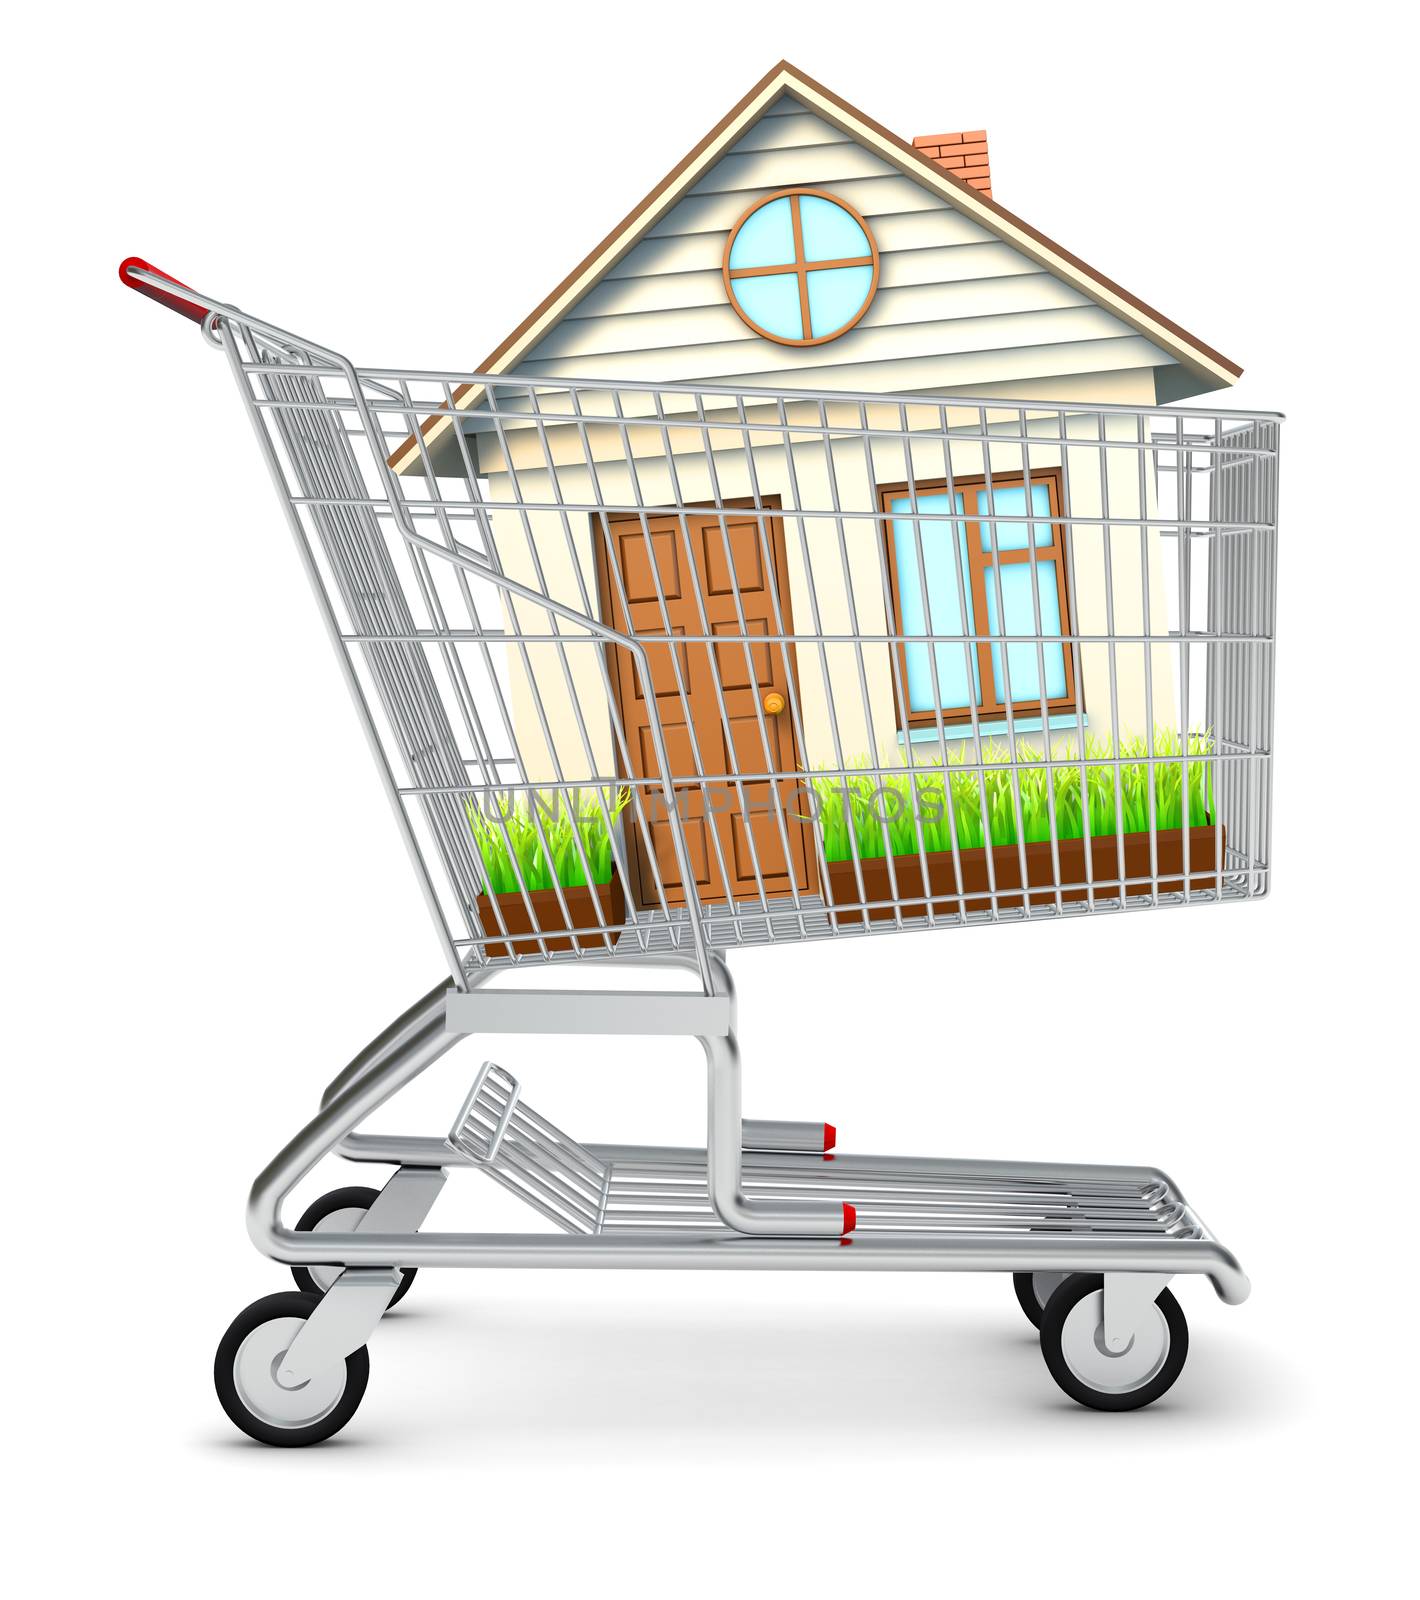 House in shopping cart on isolated white background